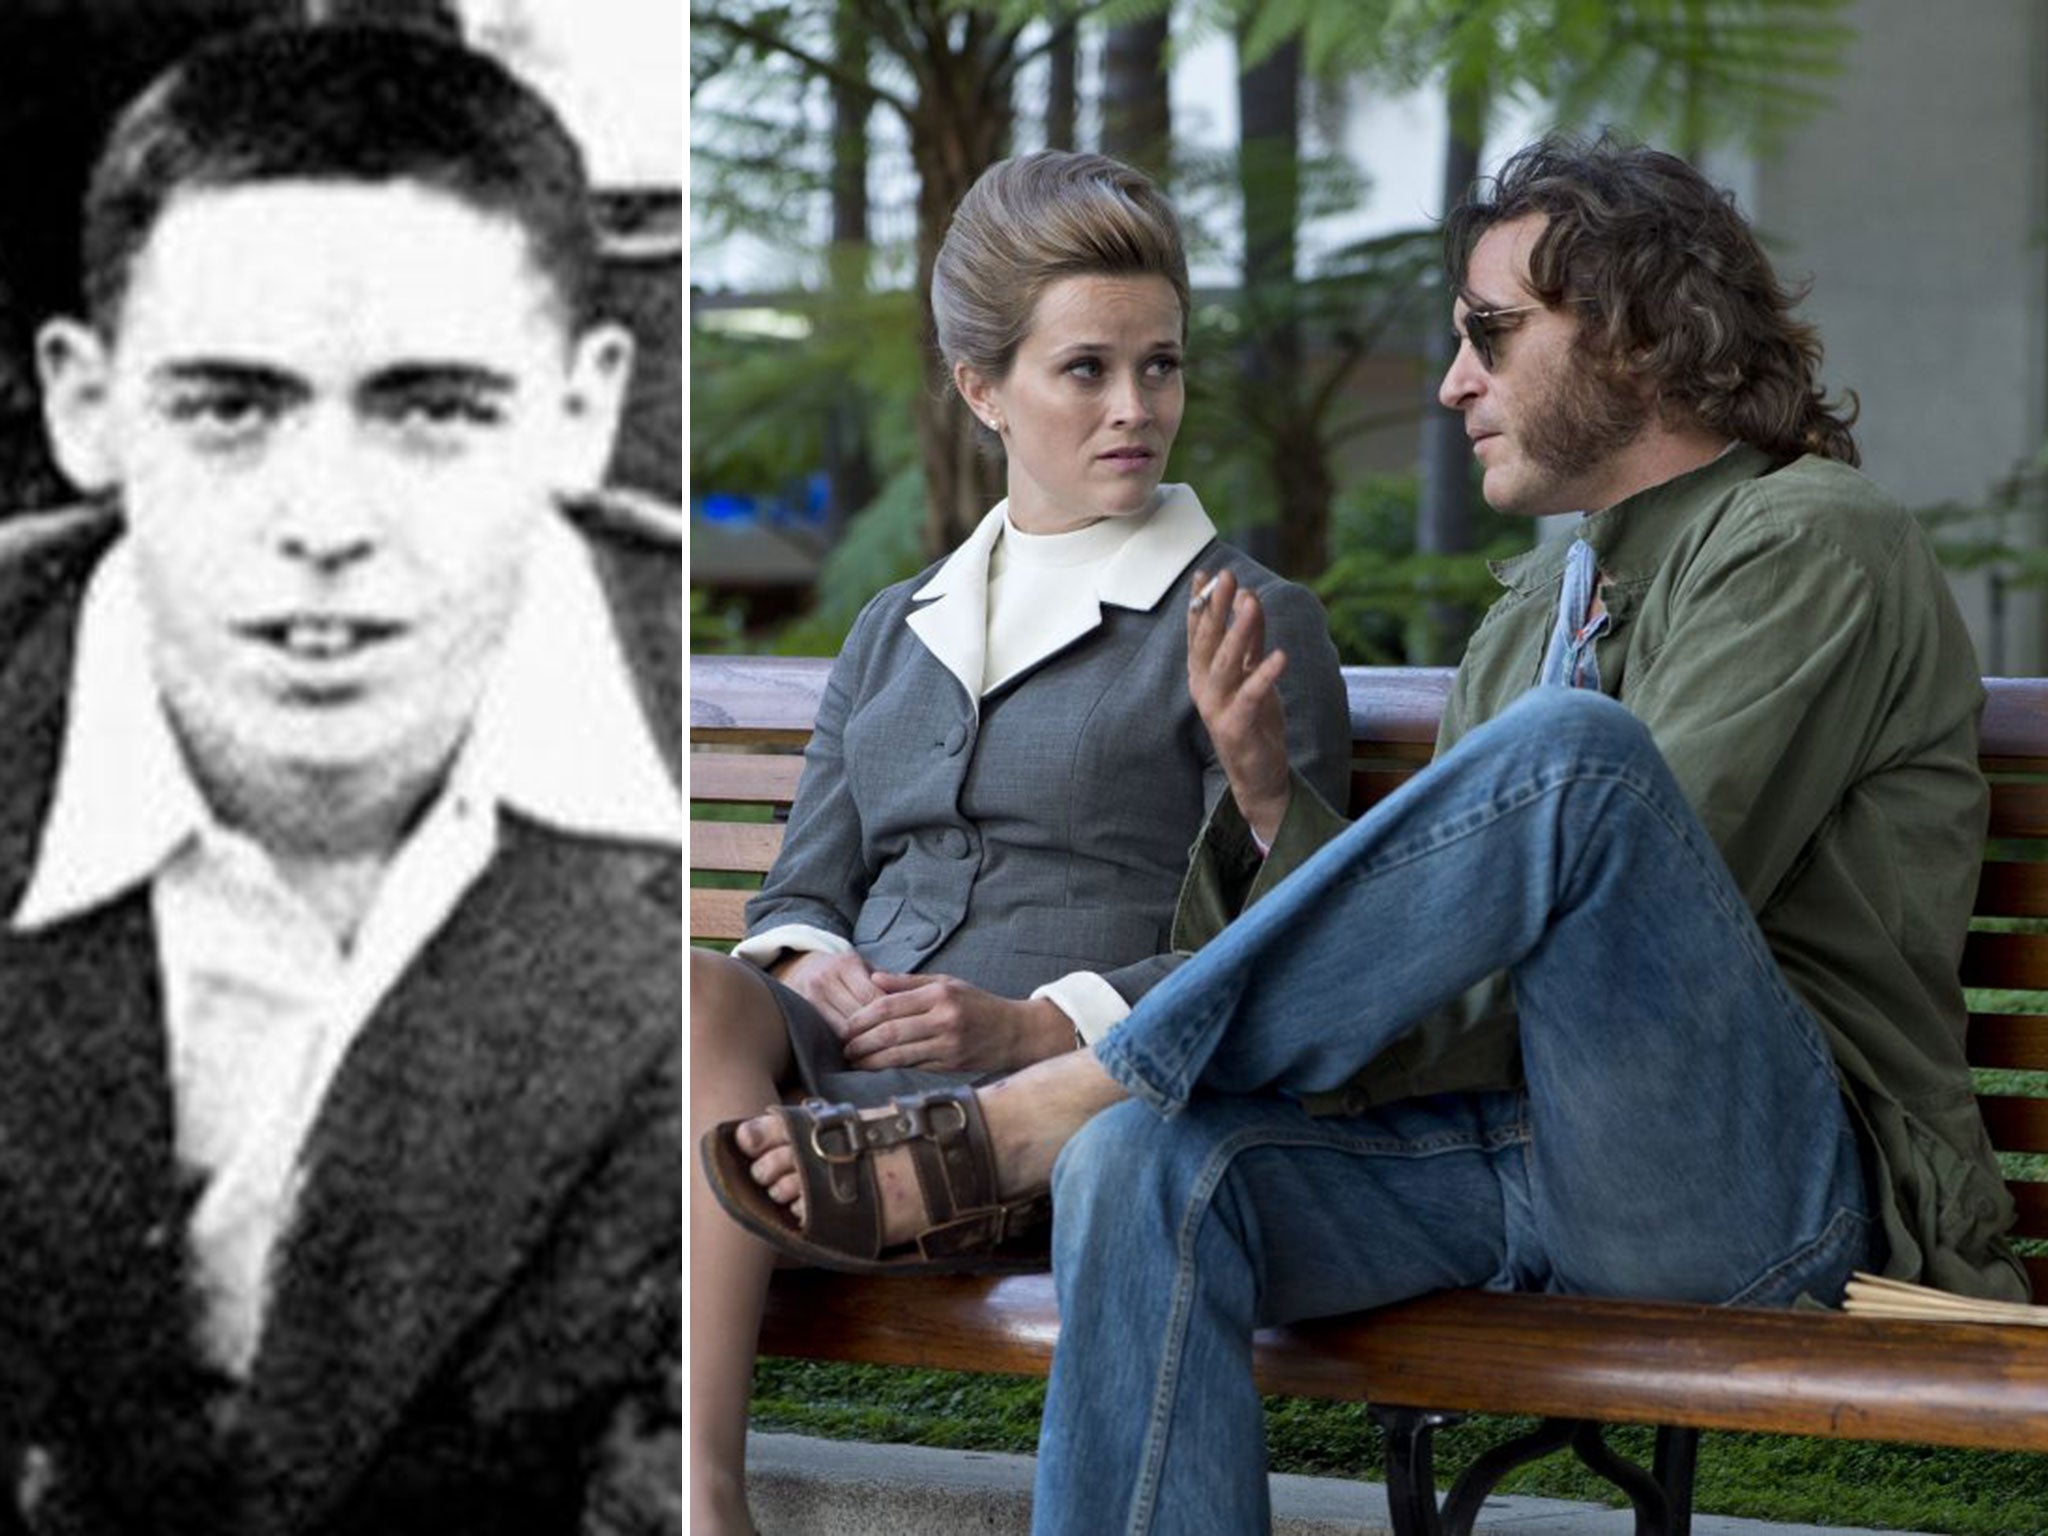 Thomas Pynchon in 1955, left, and Reese Witherspoon and Joaquin Phoenix in Paul Thomas Anderson's adaptation of his novel, Inherent Vice